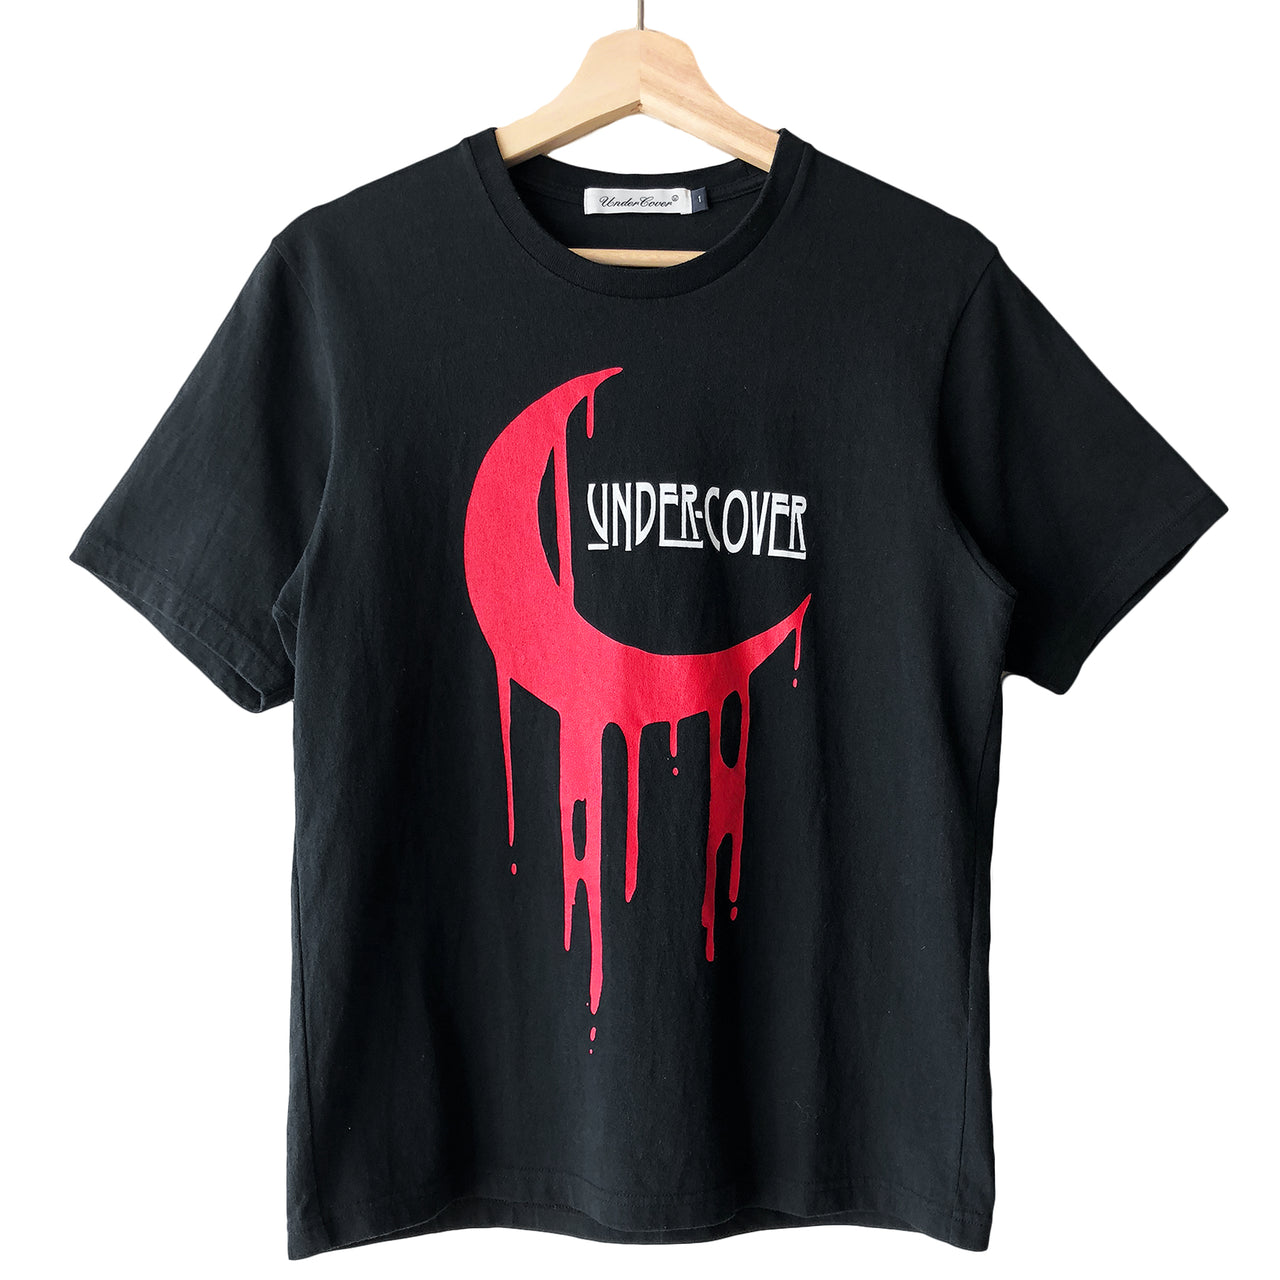 Undercover Blood Crescent Moon Tee - SS17 "Improvisation Concepts"